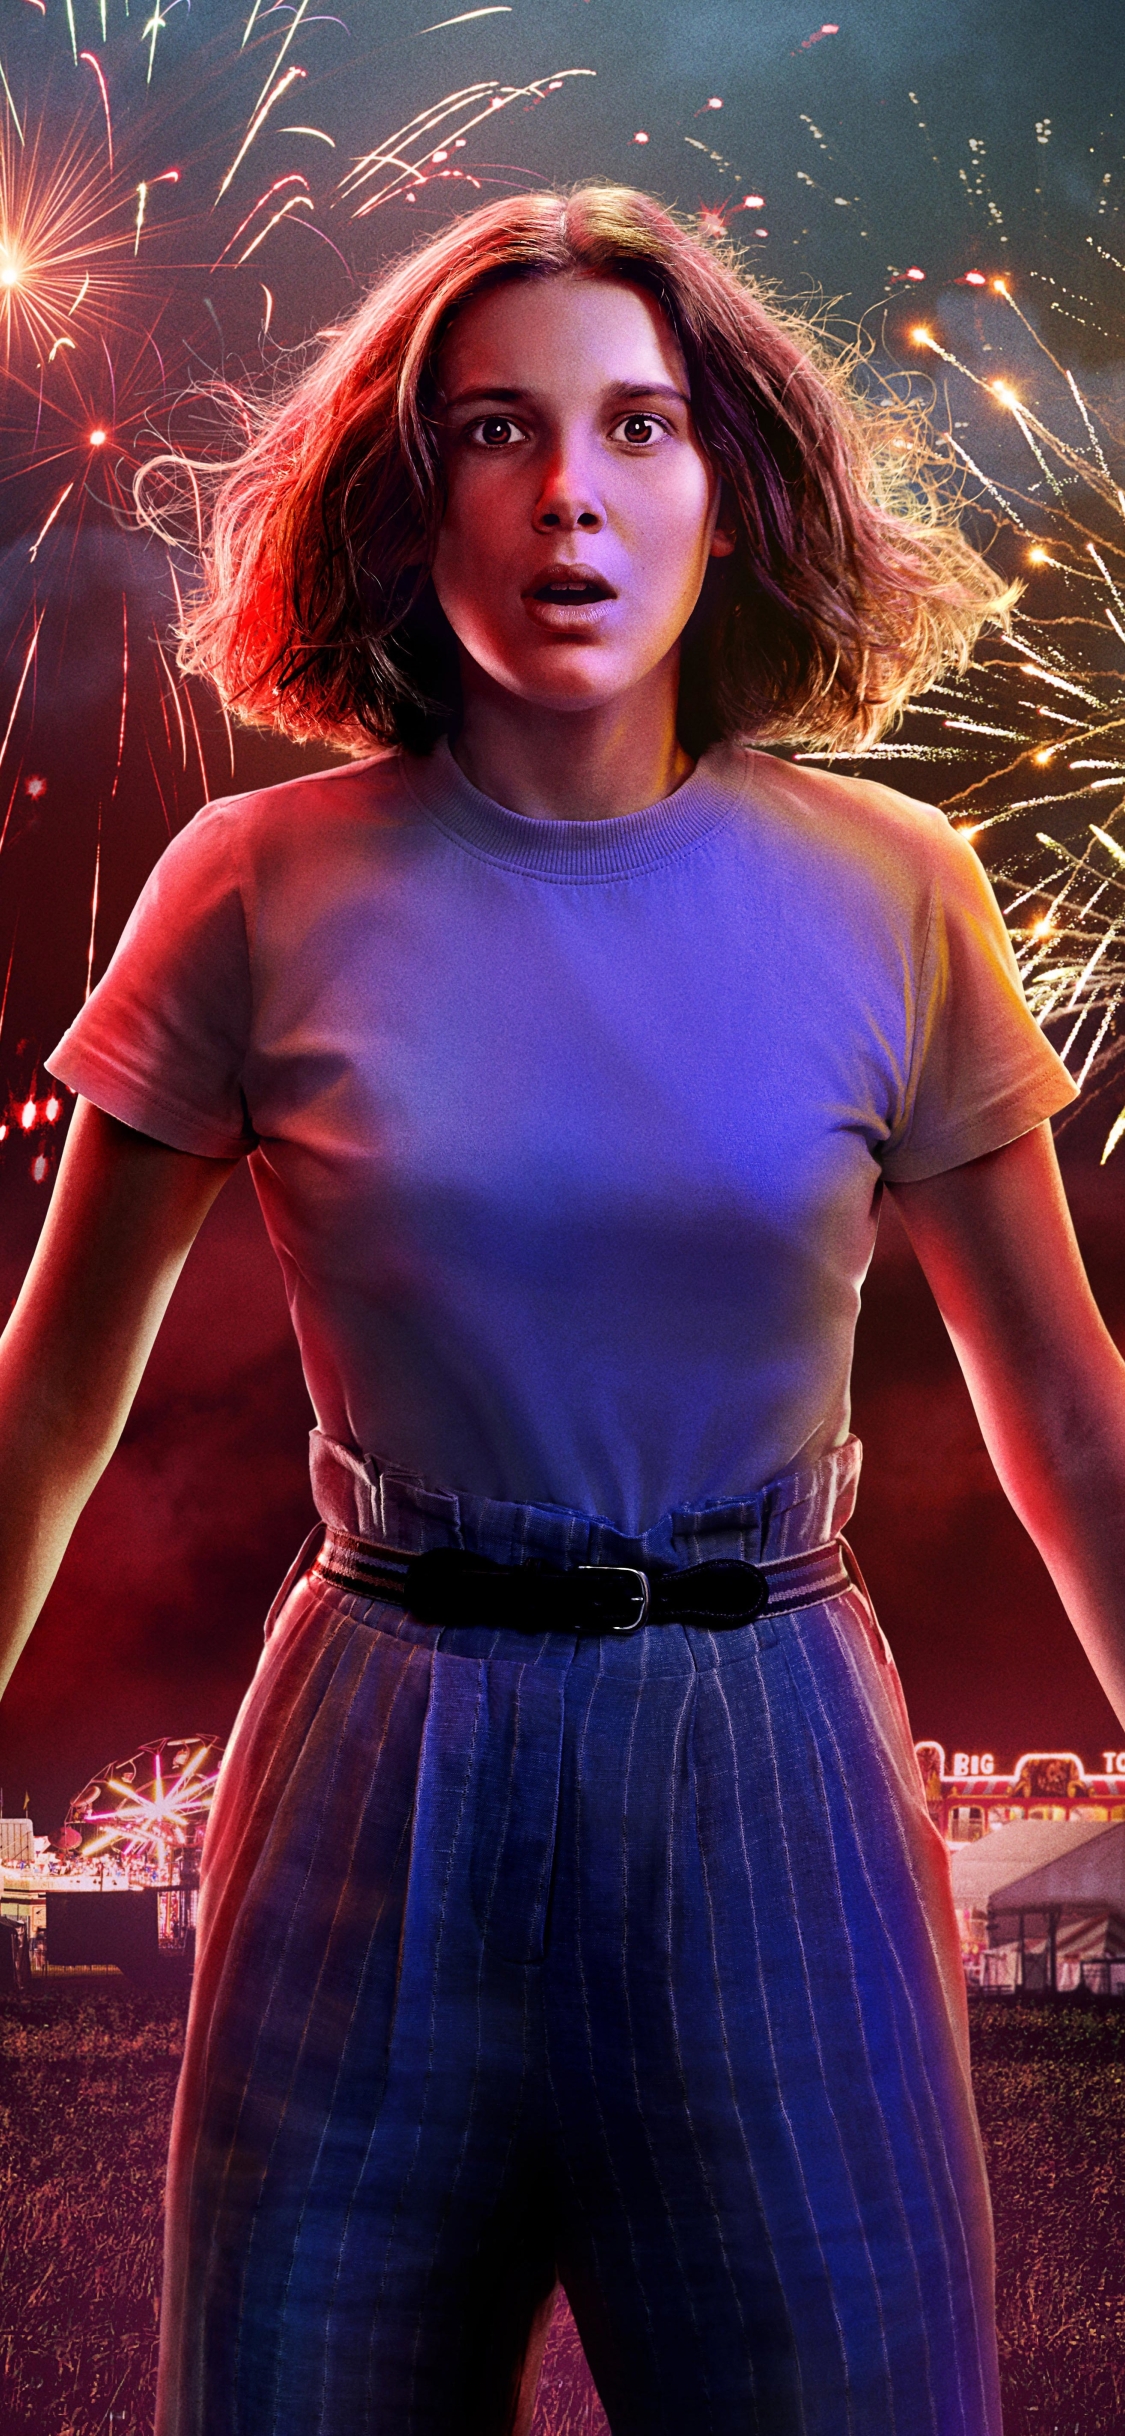 1125x2436 Millie Bobby Brown As Eleven Stranger Things 3 Poster Iphone